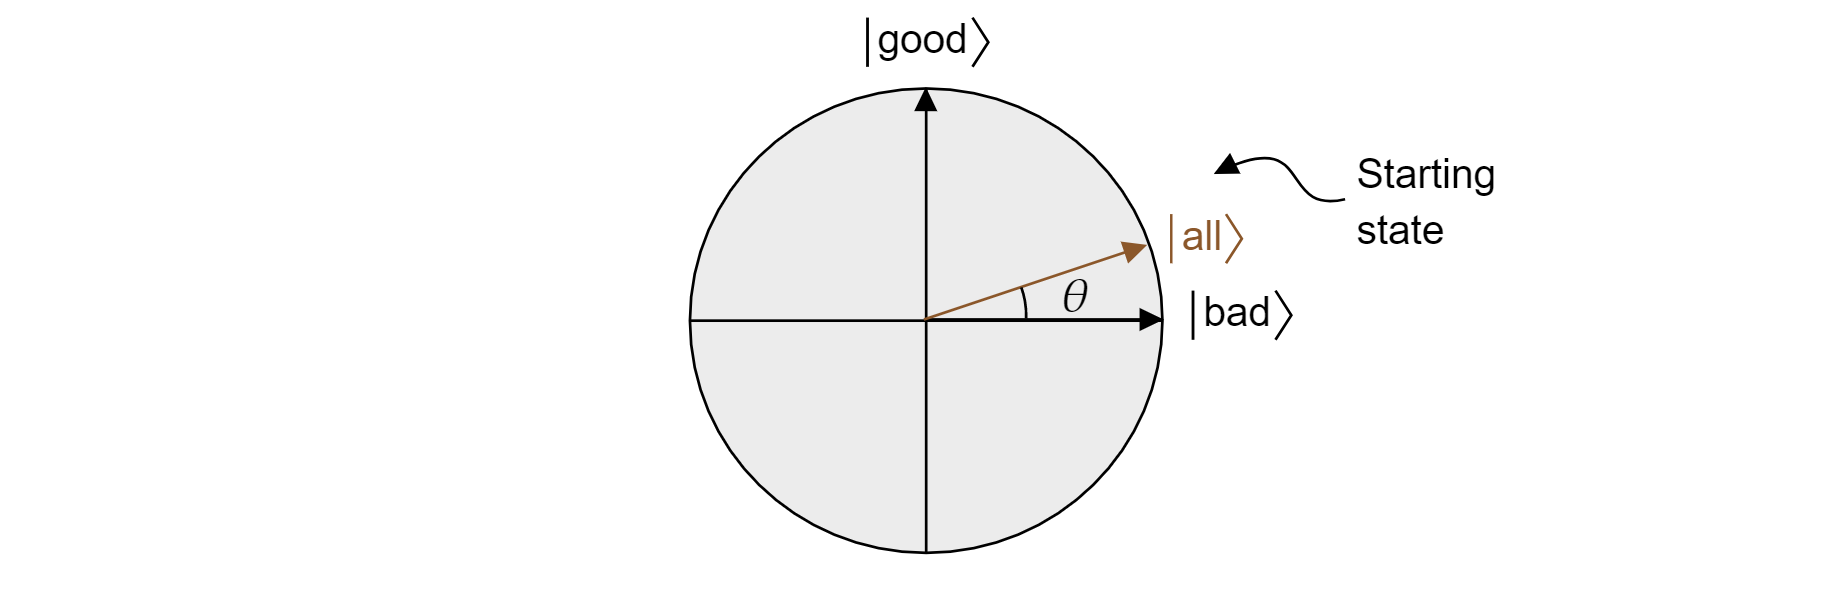 Plot of the starting state as a superposition of the good and bad states in the plane.